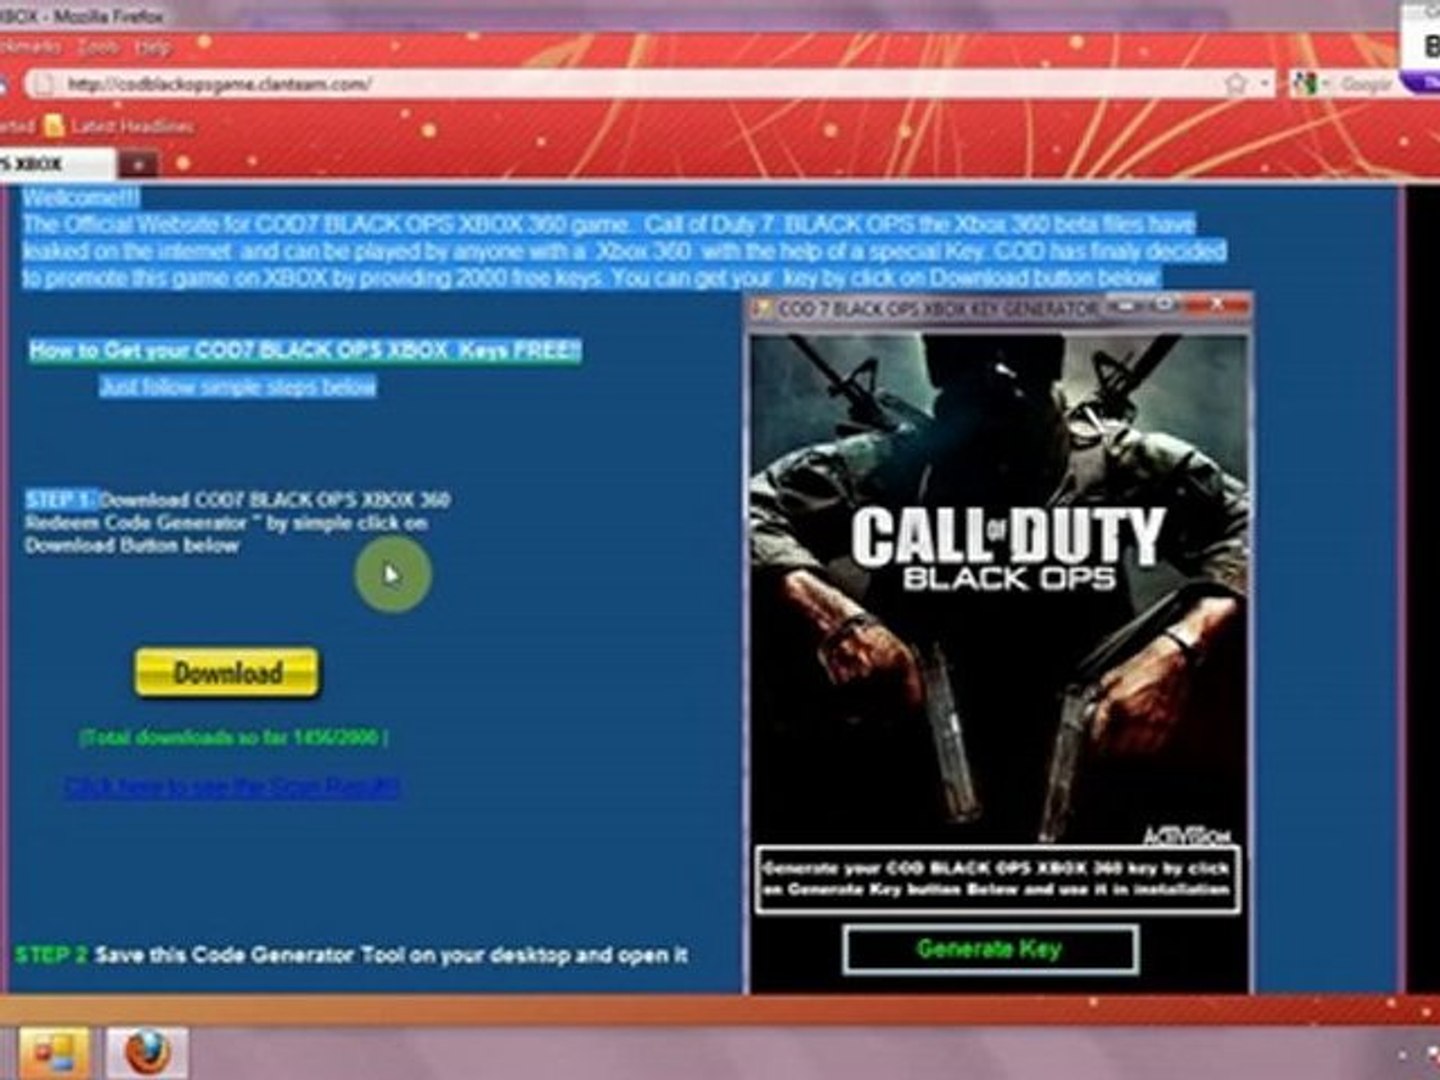 Download COD Blackops xbox 360 codes Free fullworking - video Dailymotion